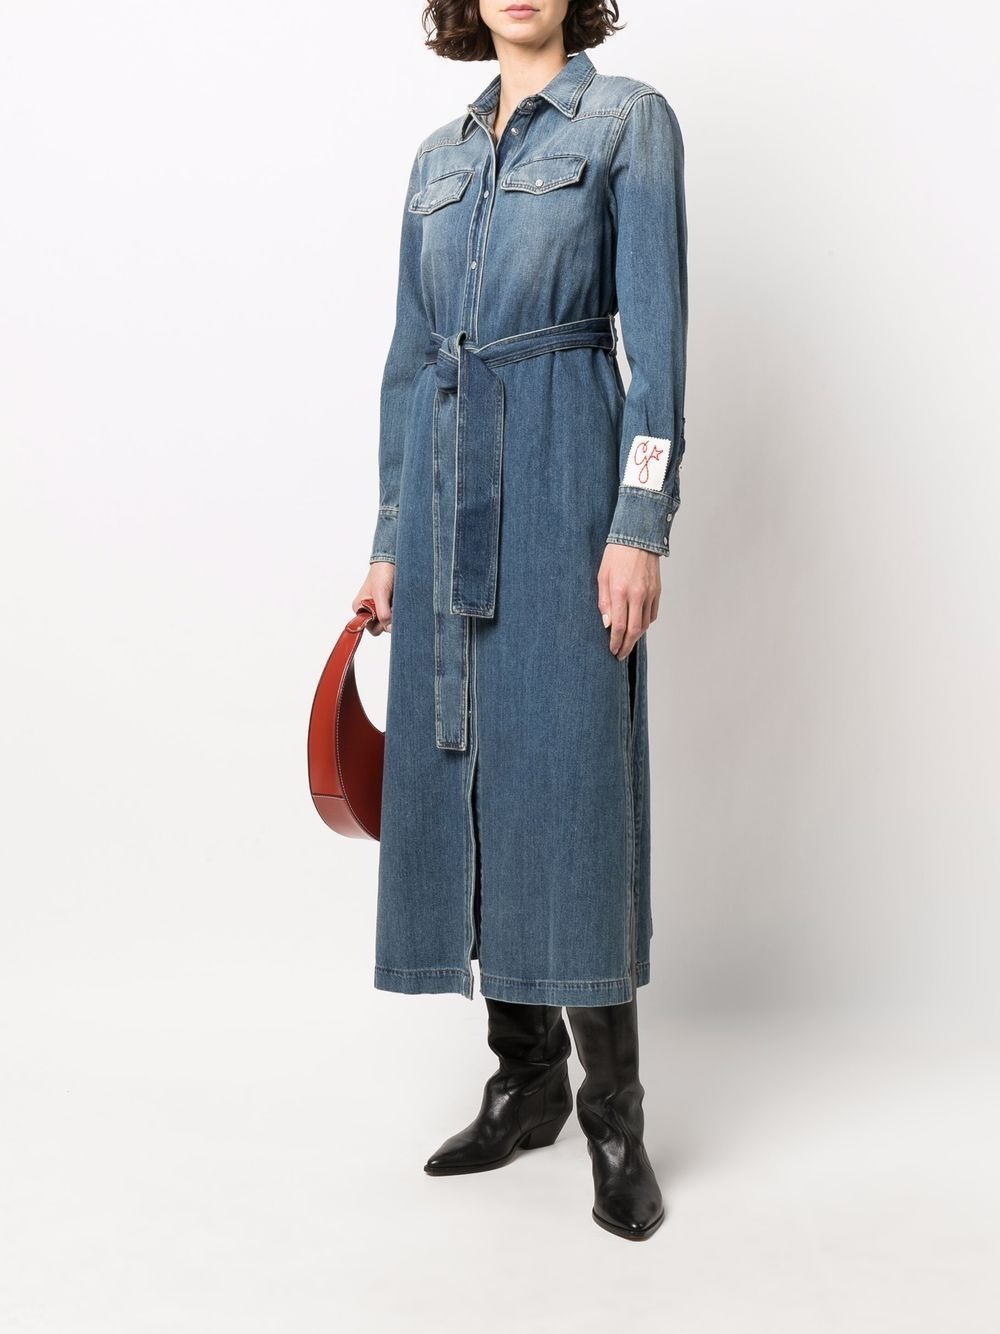 Blue Fading Hooded Denim Dress Fashion Large Size Jeans Dress in #1 #2 One  Size | Denim dress, Casual denim dress, Denim dress style